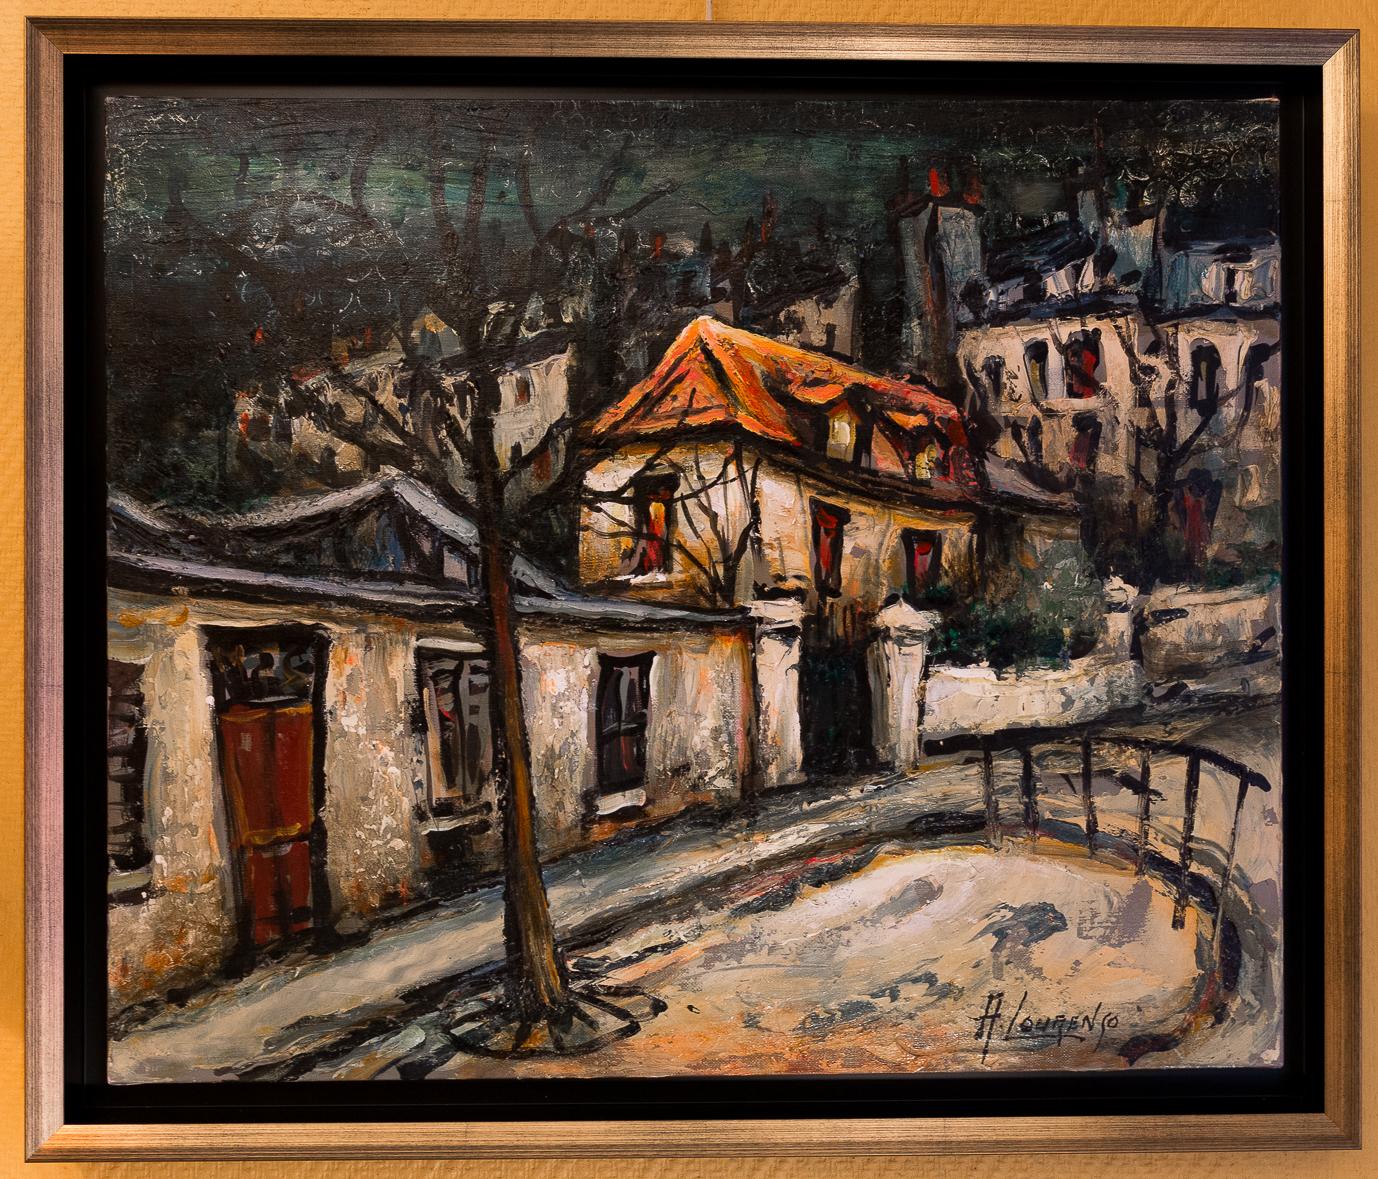 An interesting and decorative oil on canvas depicting The Montmartre, circa 1920s Picasso House.
Armand Lourenco made early 20th century Paris views his specialty. He shows us the Picasso house with whom he worked.

Gorgeous work of this famous